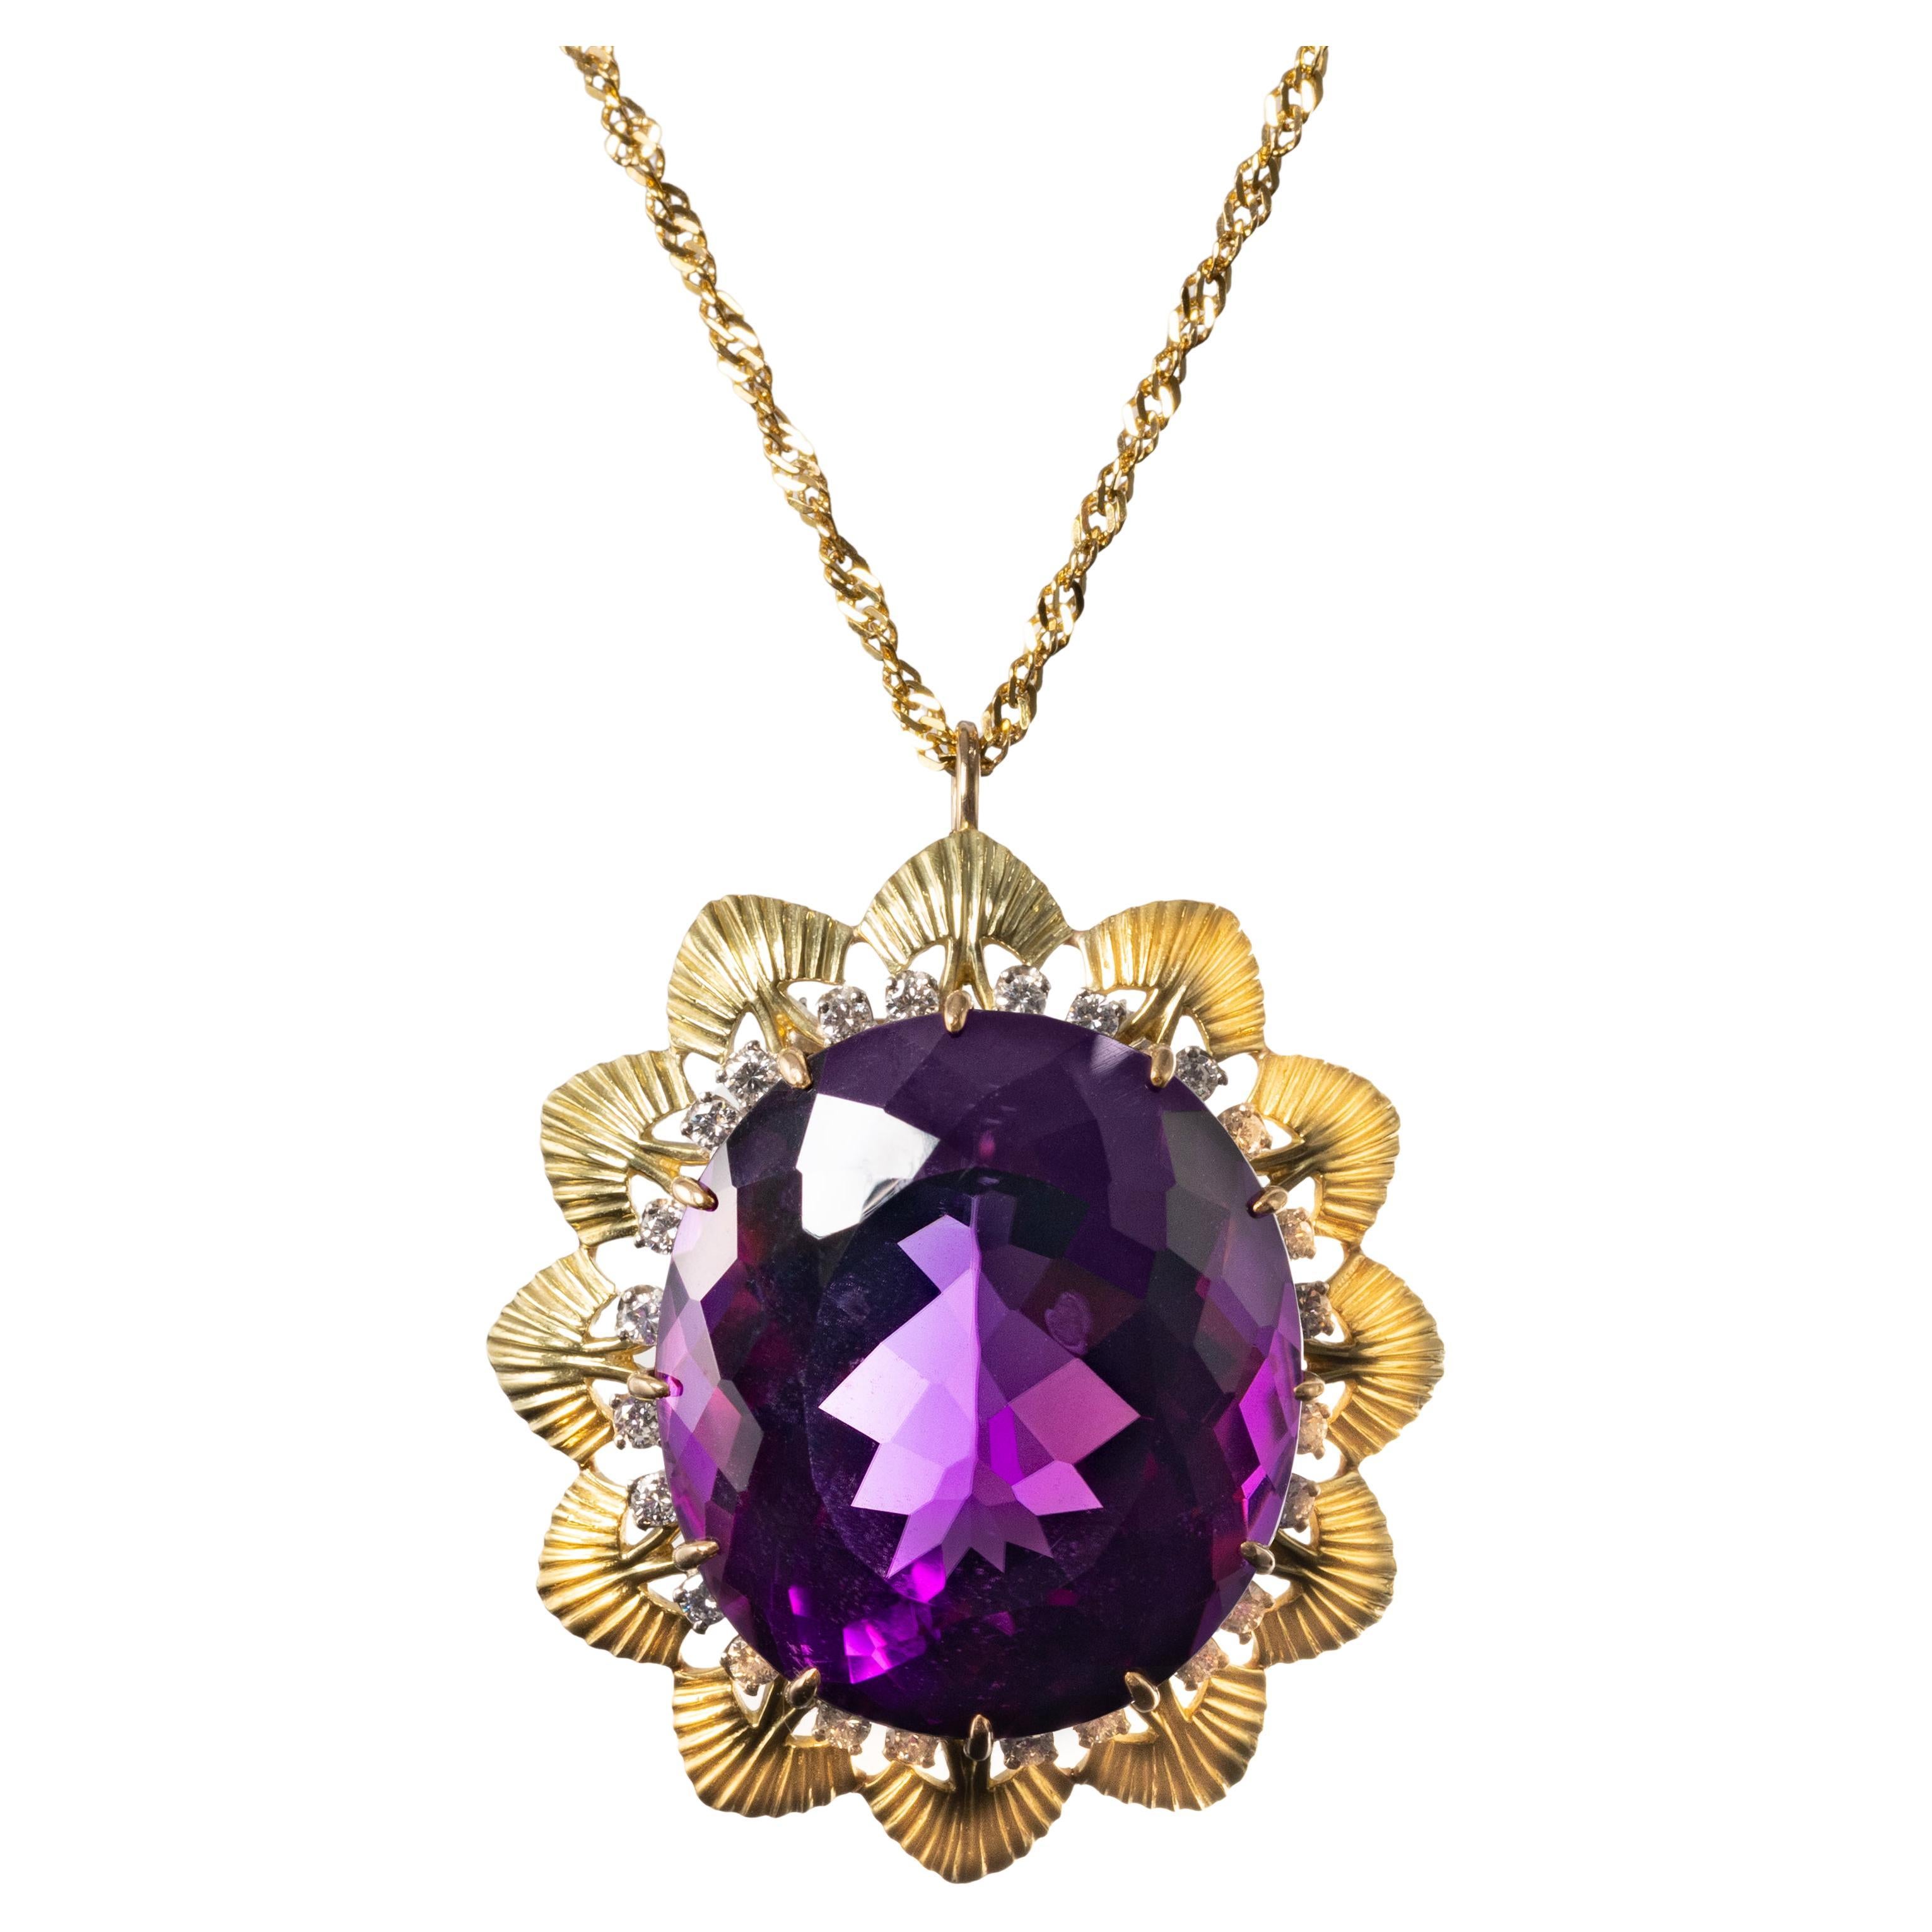 Huge Amethyst Pendant or Brooch with Diamonds 55 Carats